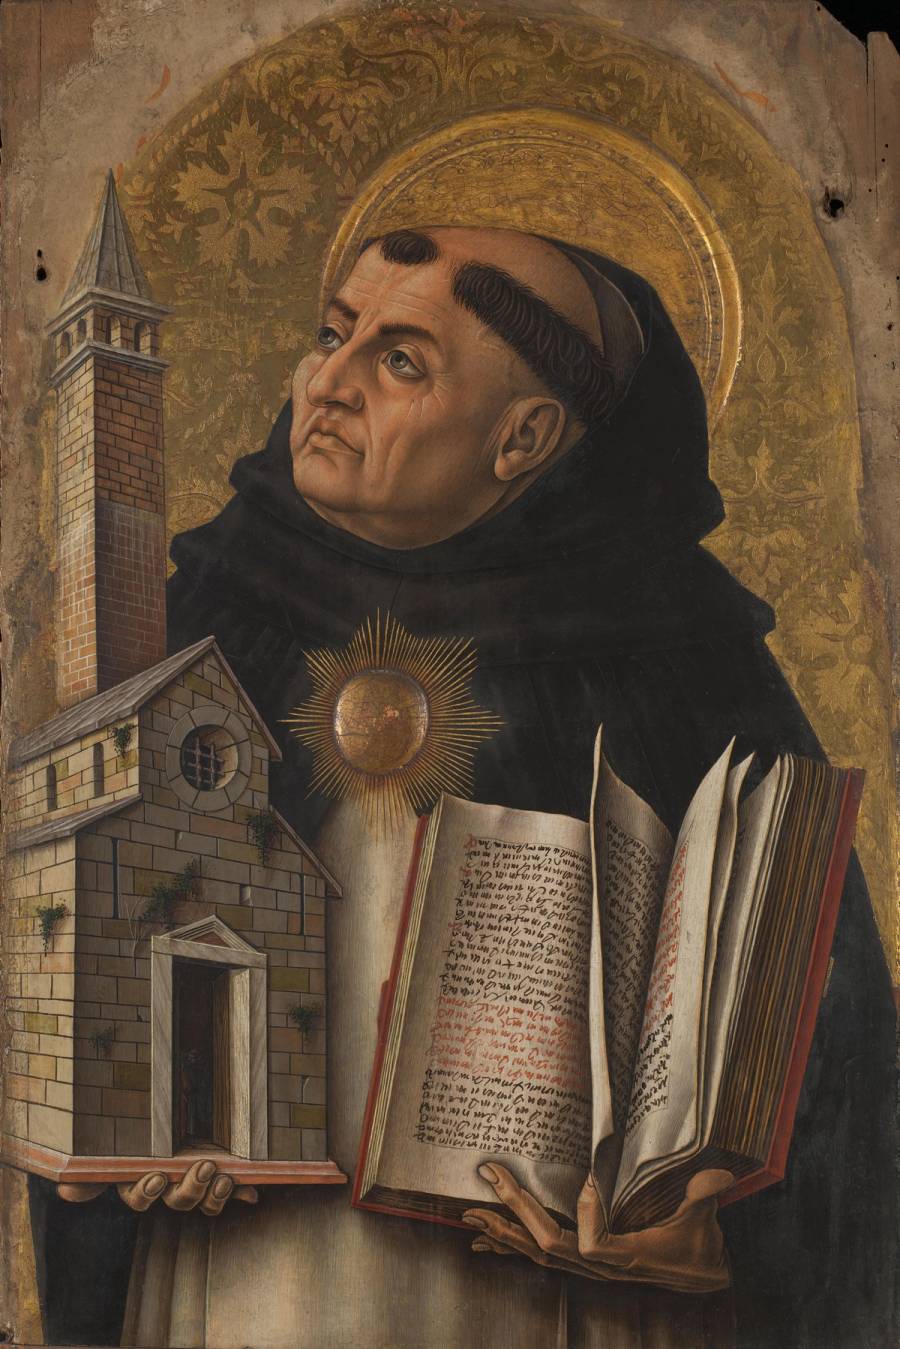 An altarpiece depicting Thomas Aquinas in Ascoli Piceno, Italy, by Carlo Crivelli, 15th century. With the rise of a wealthy merchant class in the 1100s, figures such as Saint Thomas of Aquinas looked for ways to make wealth moral.